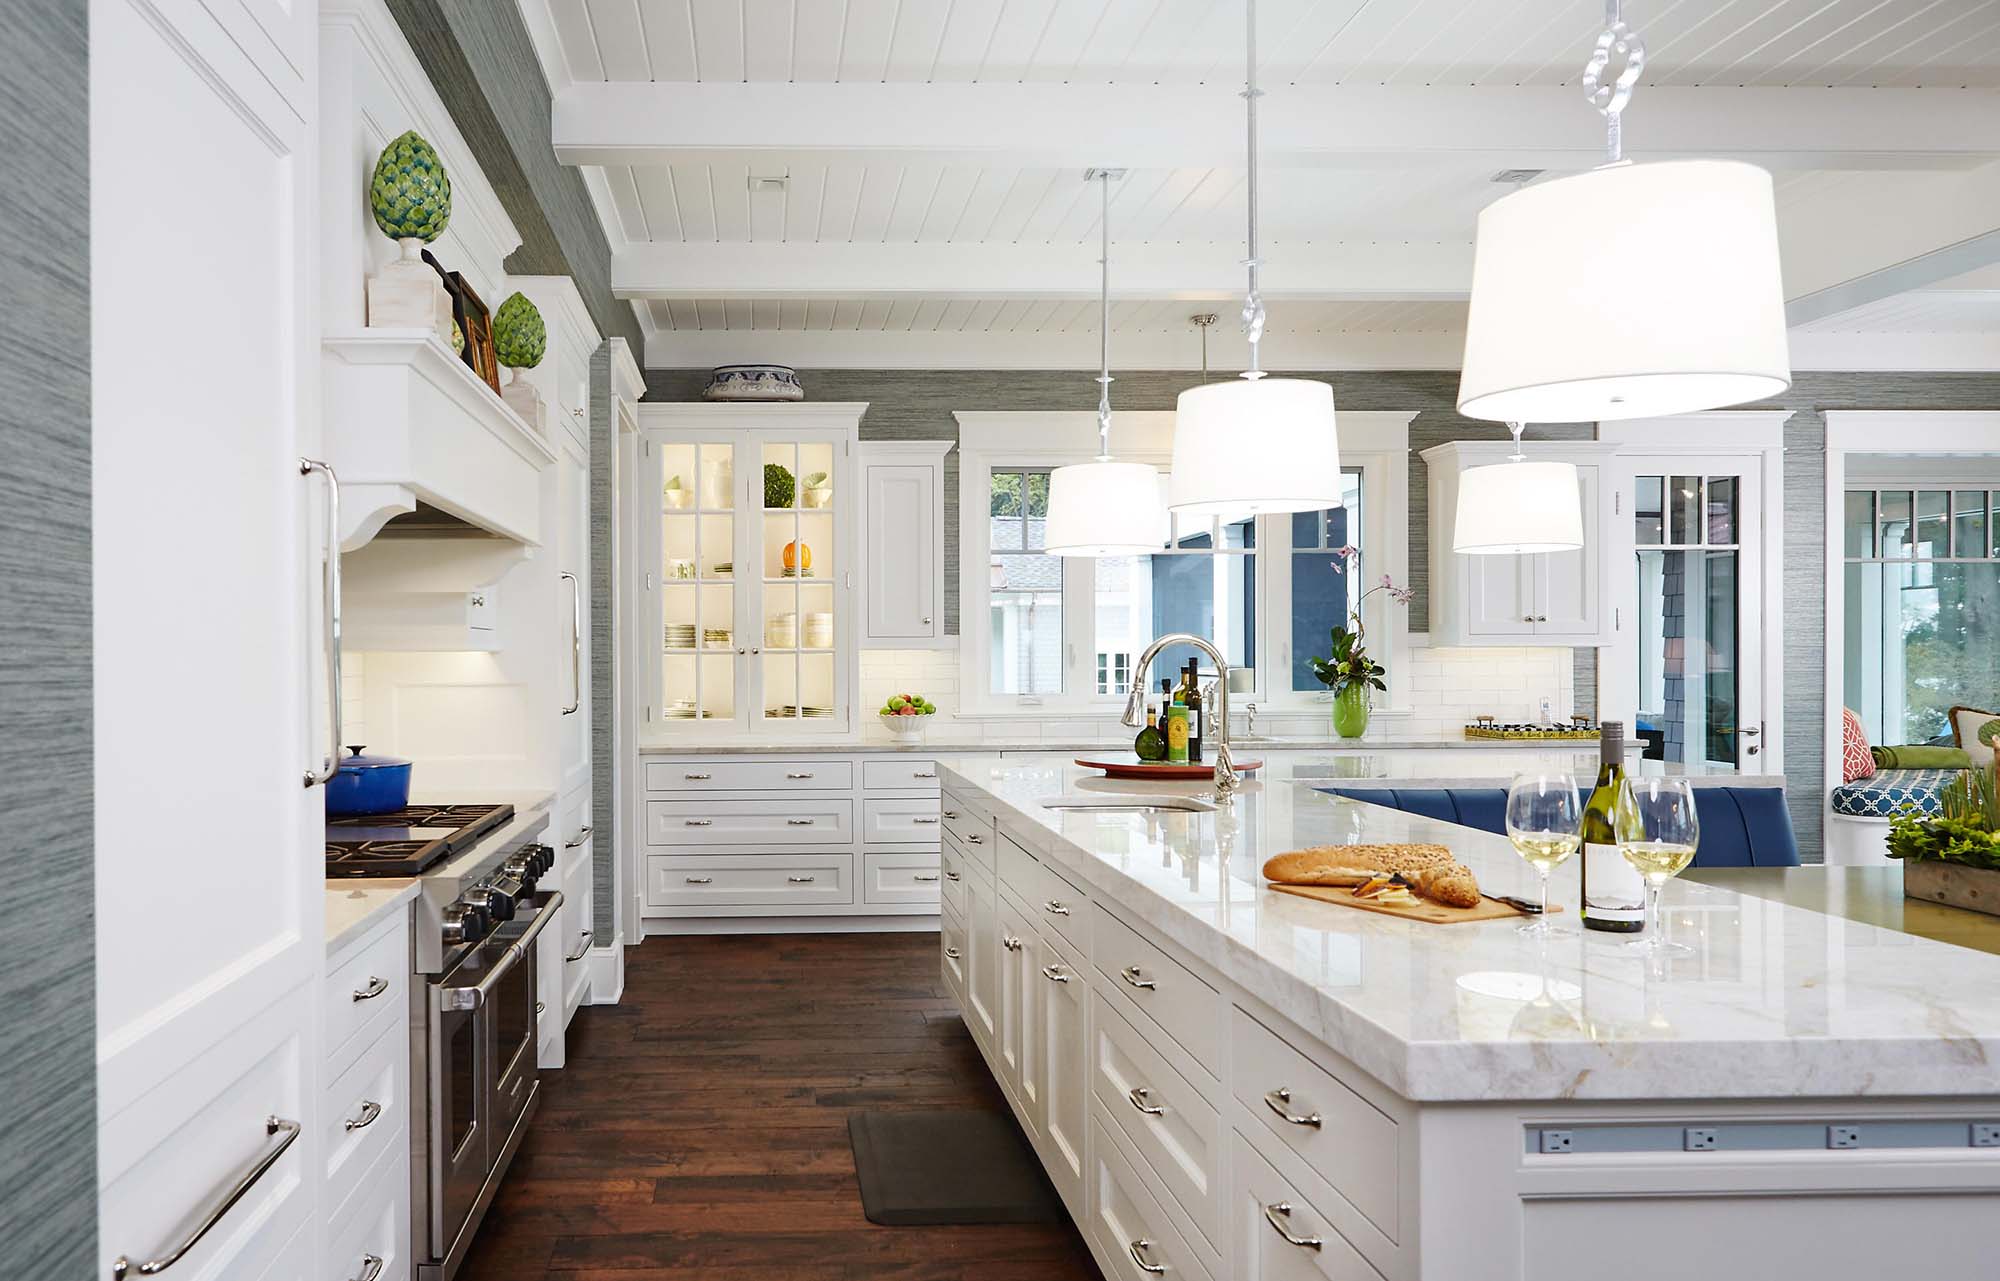 luxury kitchen white shaker cabinets exposed beam ceilings - Gambrick top local home builder NJ